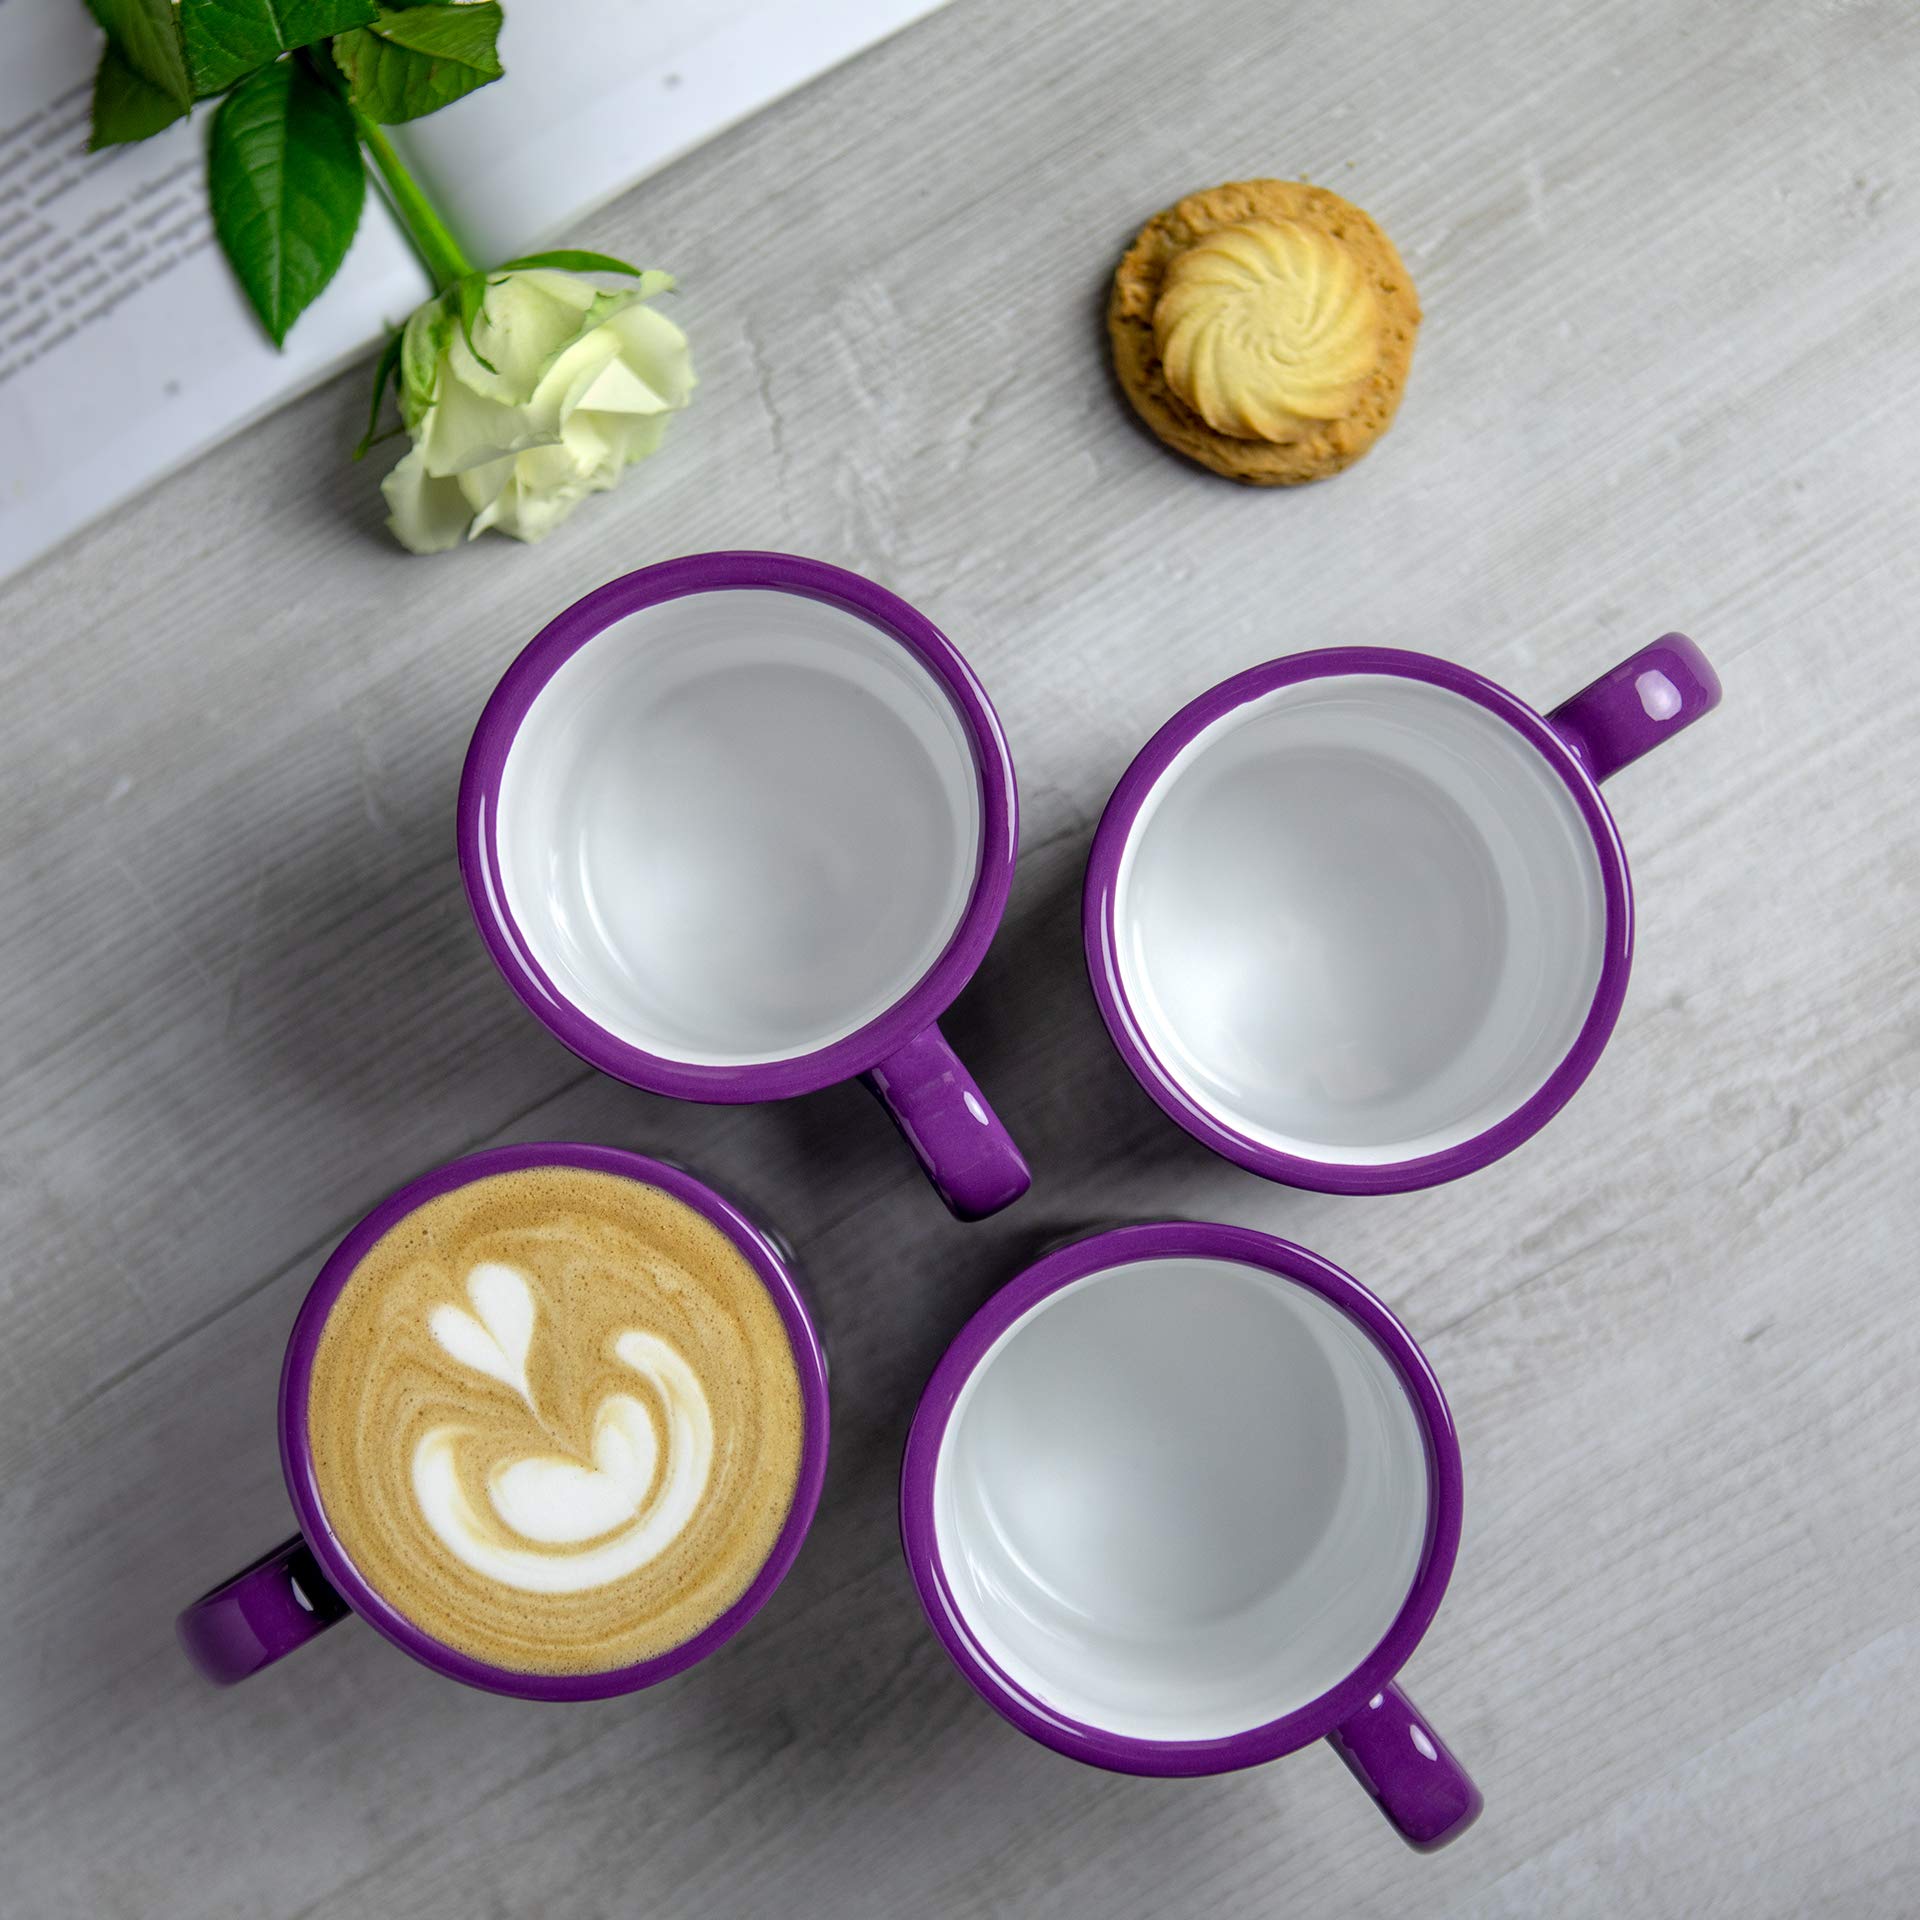 City to Cottage Handmade Purple and White Polka Dot Ceramic Extra Large 17.5oz/500ml | Hot Chocolate, Coffee, Tea Mug, Cup with Handle Unique Designer Pottery Gift for Tea Lovers